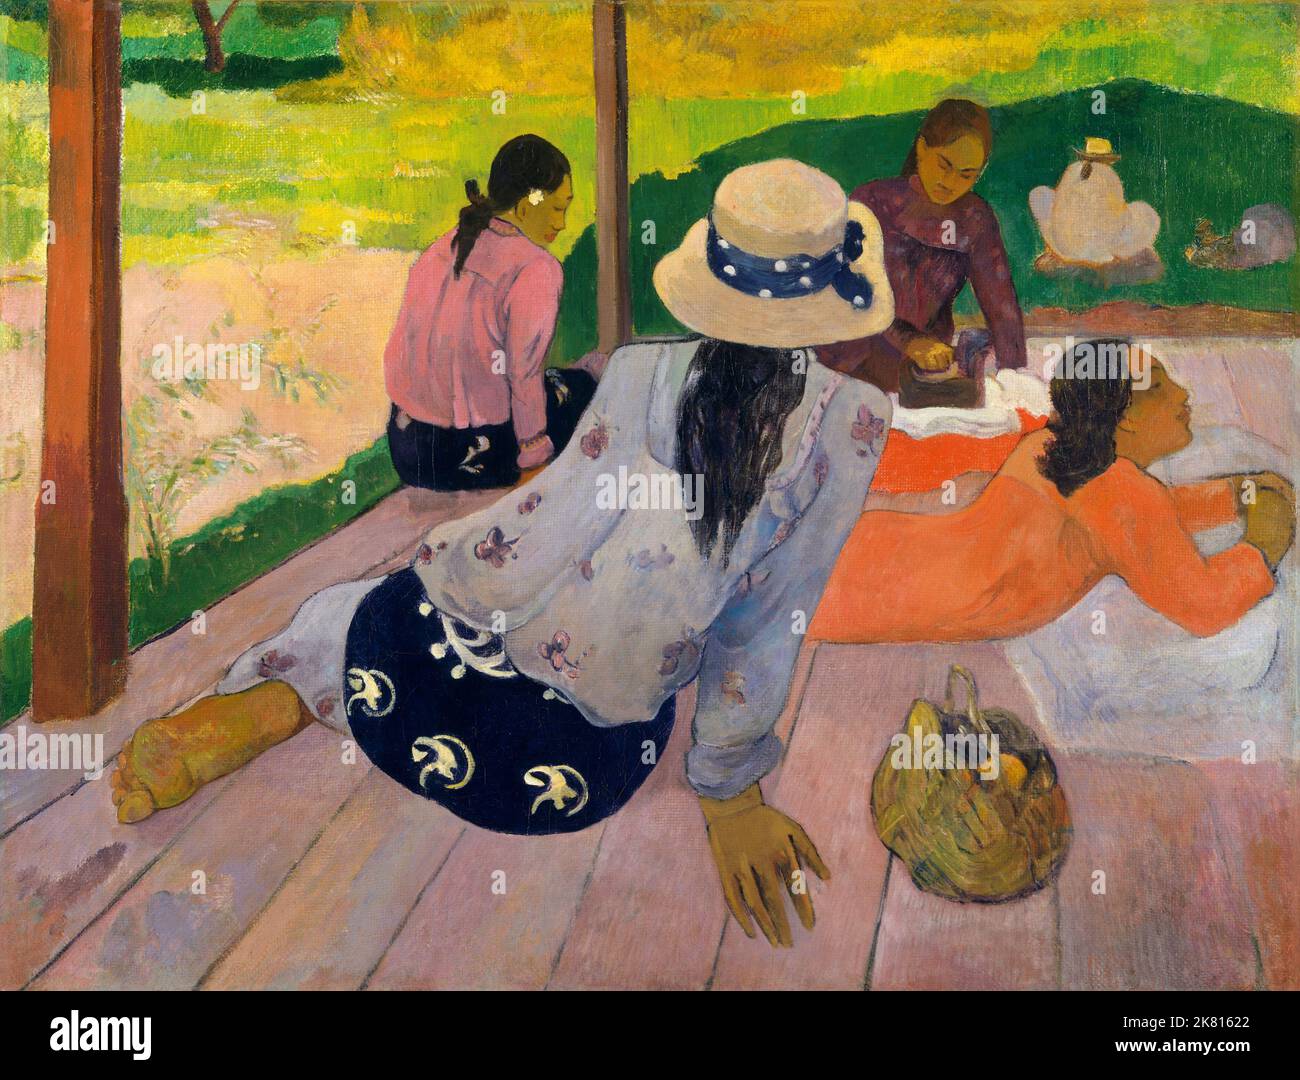 Tahiti: 'La Sieste' (The Siesta). Oil on canvas painting by Paul Gauguin (7 June 1848 - 8 May 1903), c. 1892-1894.  Paul Gauguin was born in Paris in 1848 and spent some of his childhood in Peru. He worked as a stockbroker with little success, and suffered from bouts of severe depression. He also painted. In 1891, Gauguin, frustrated by lack of recognition at home and financially destitute, sailed to the tropics to escape European civilisation and 'everything that is artificial and conventional'. His time there was the subject of much interest both then and in modern times. Stock Photo